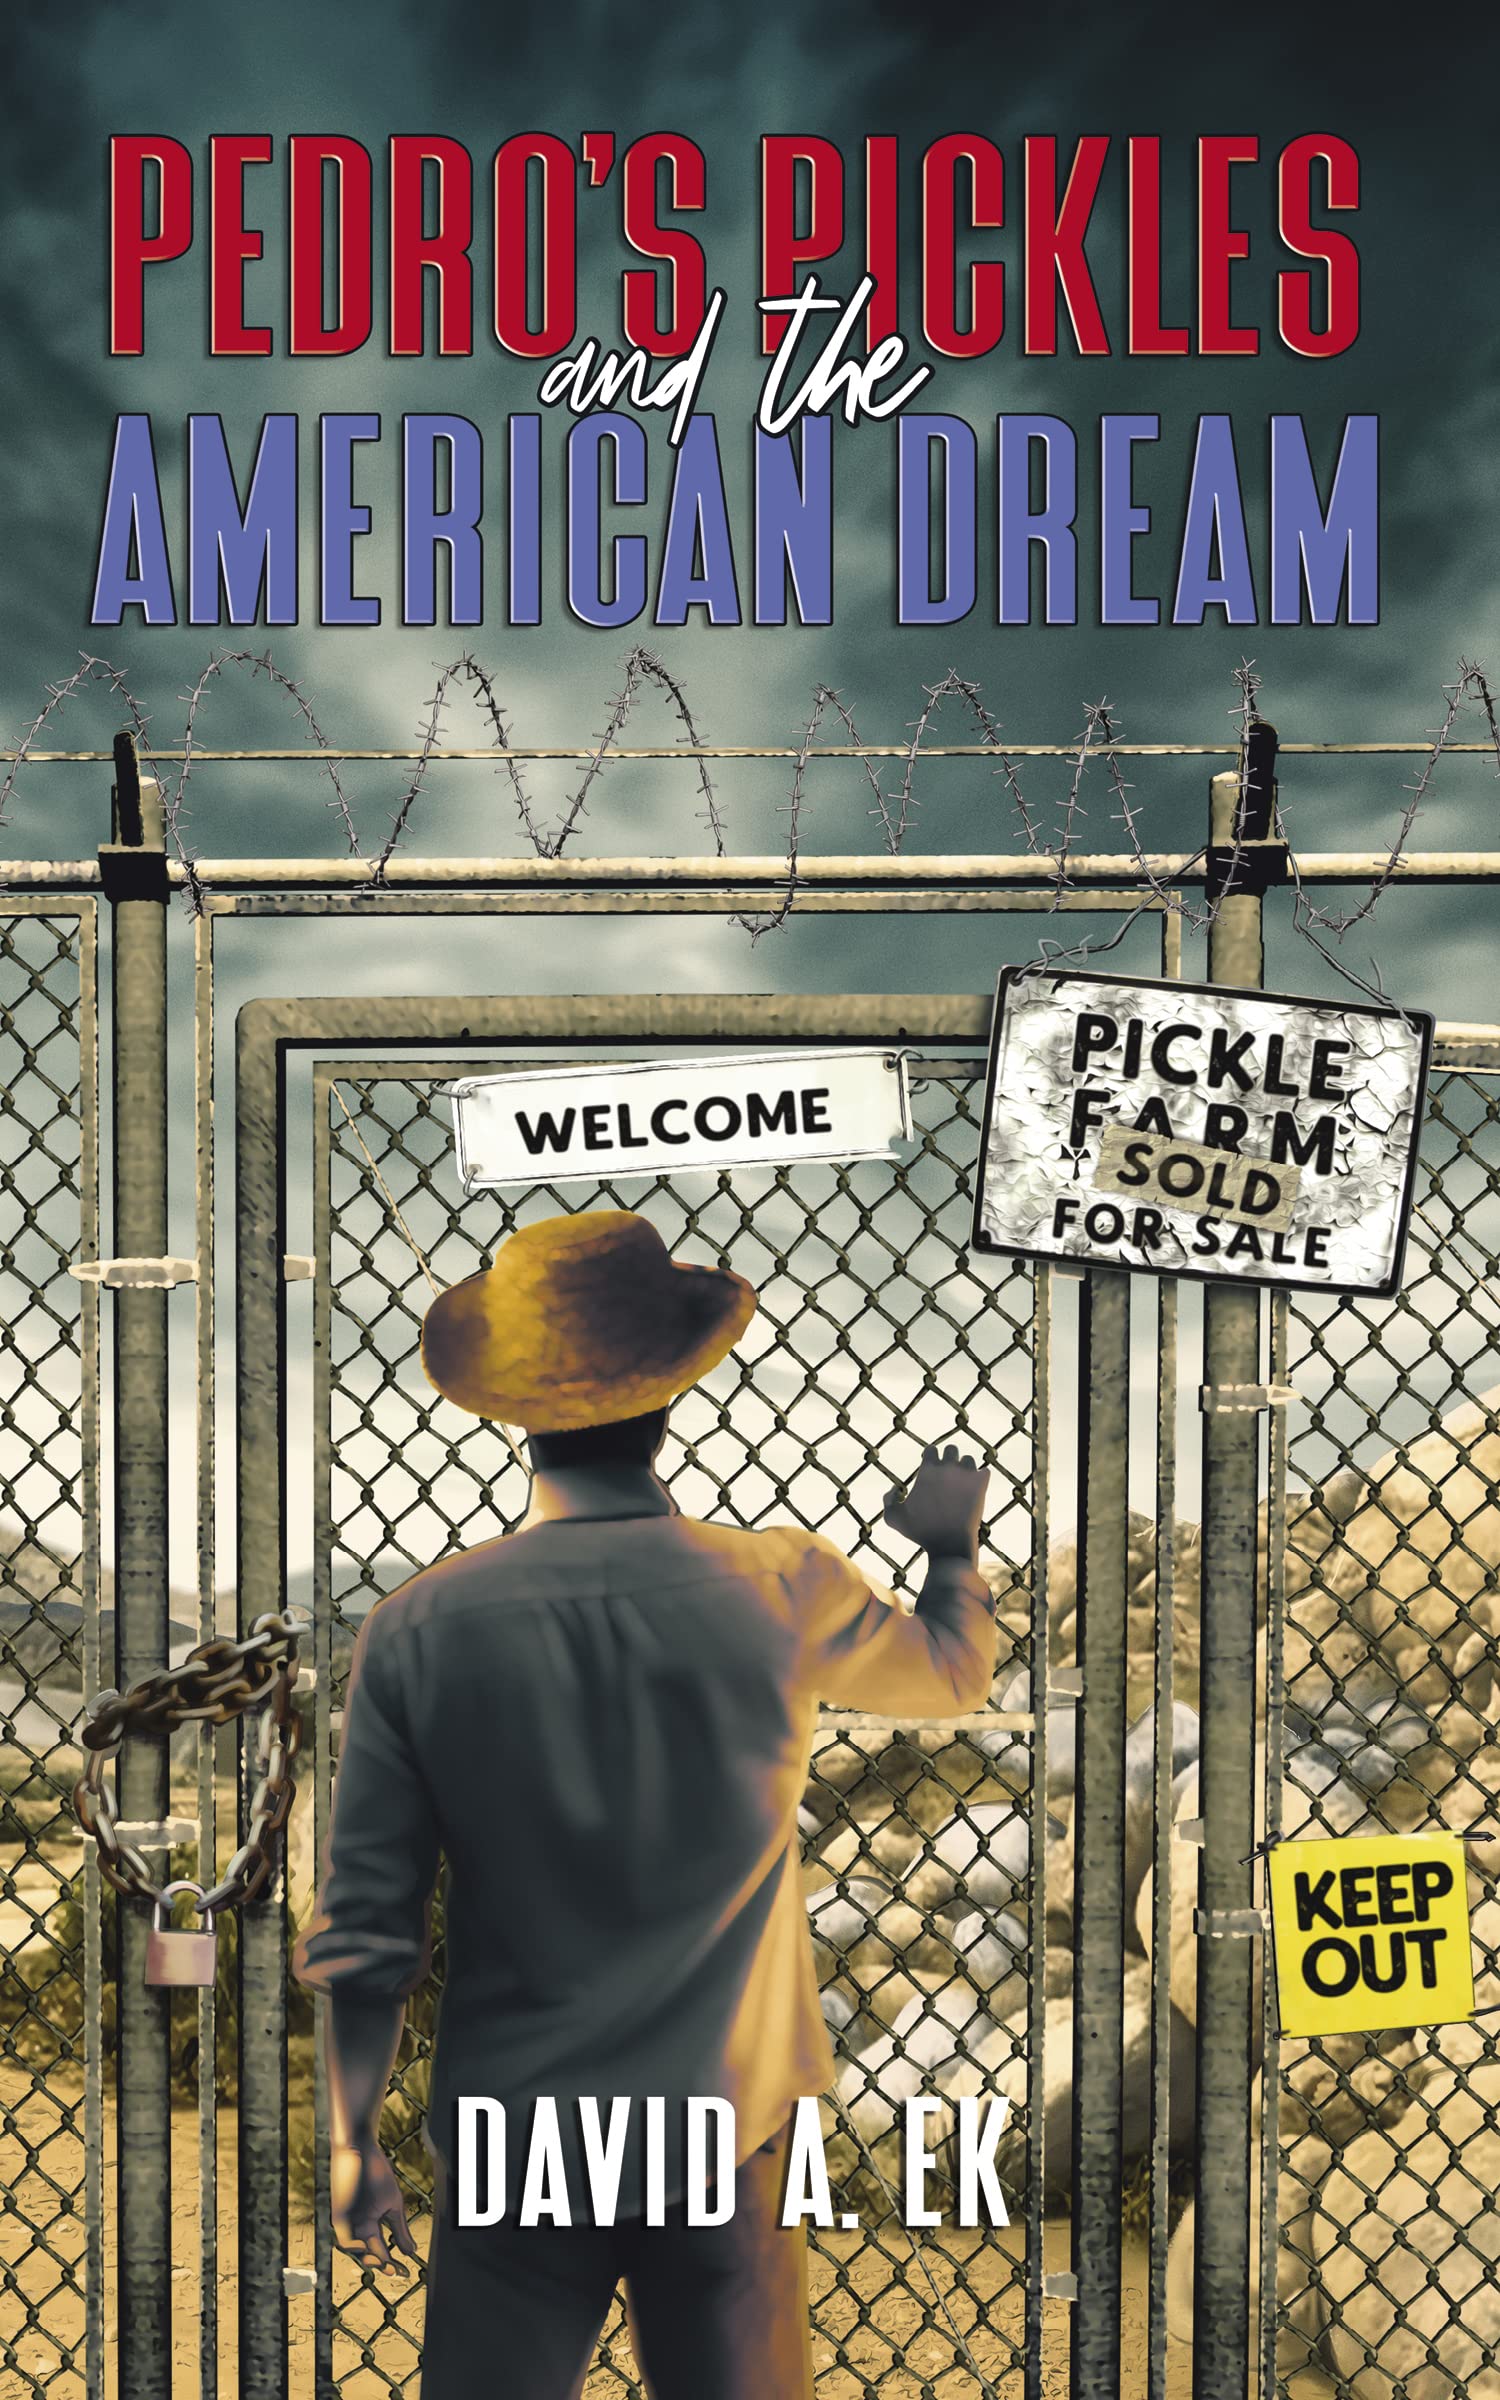 Pedro's Pickles and the American Dream by David Ek